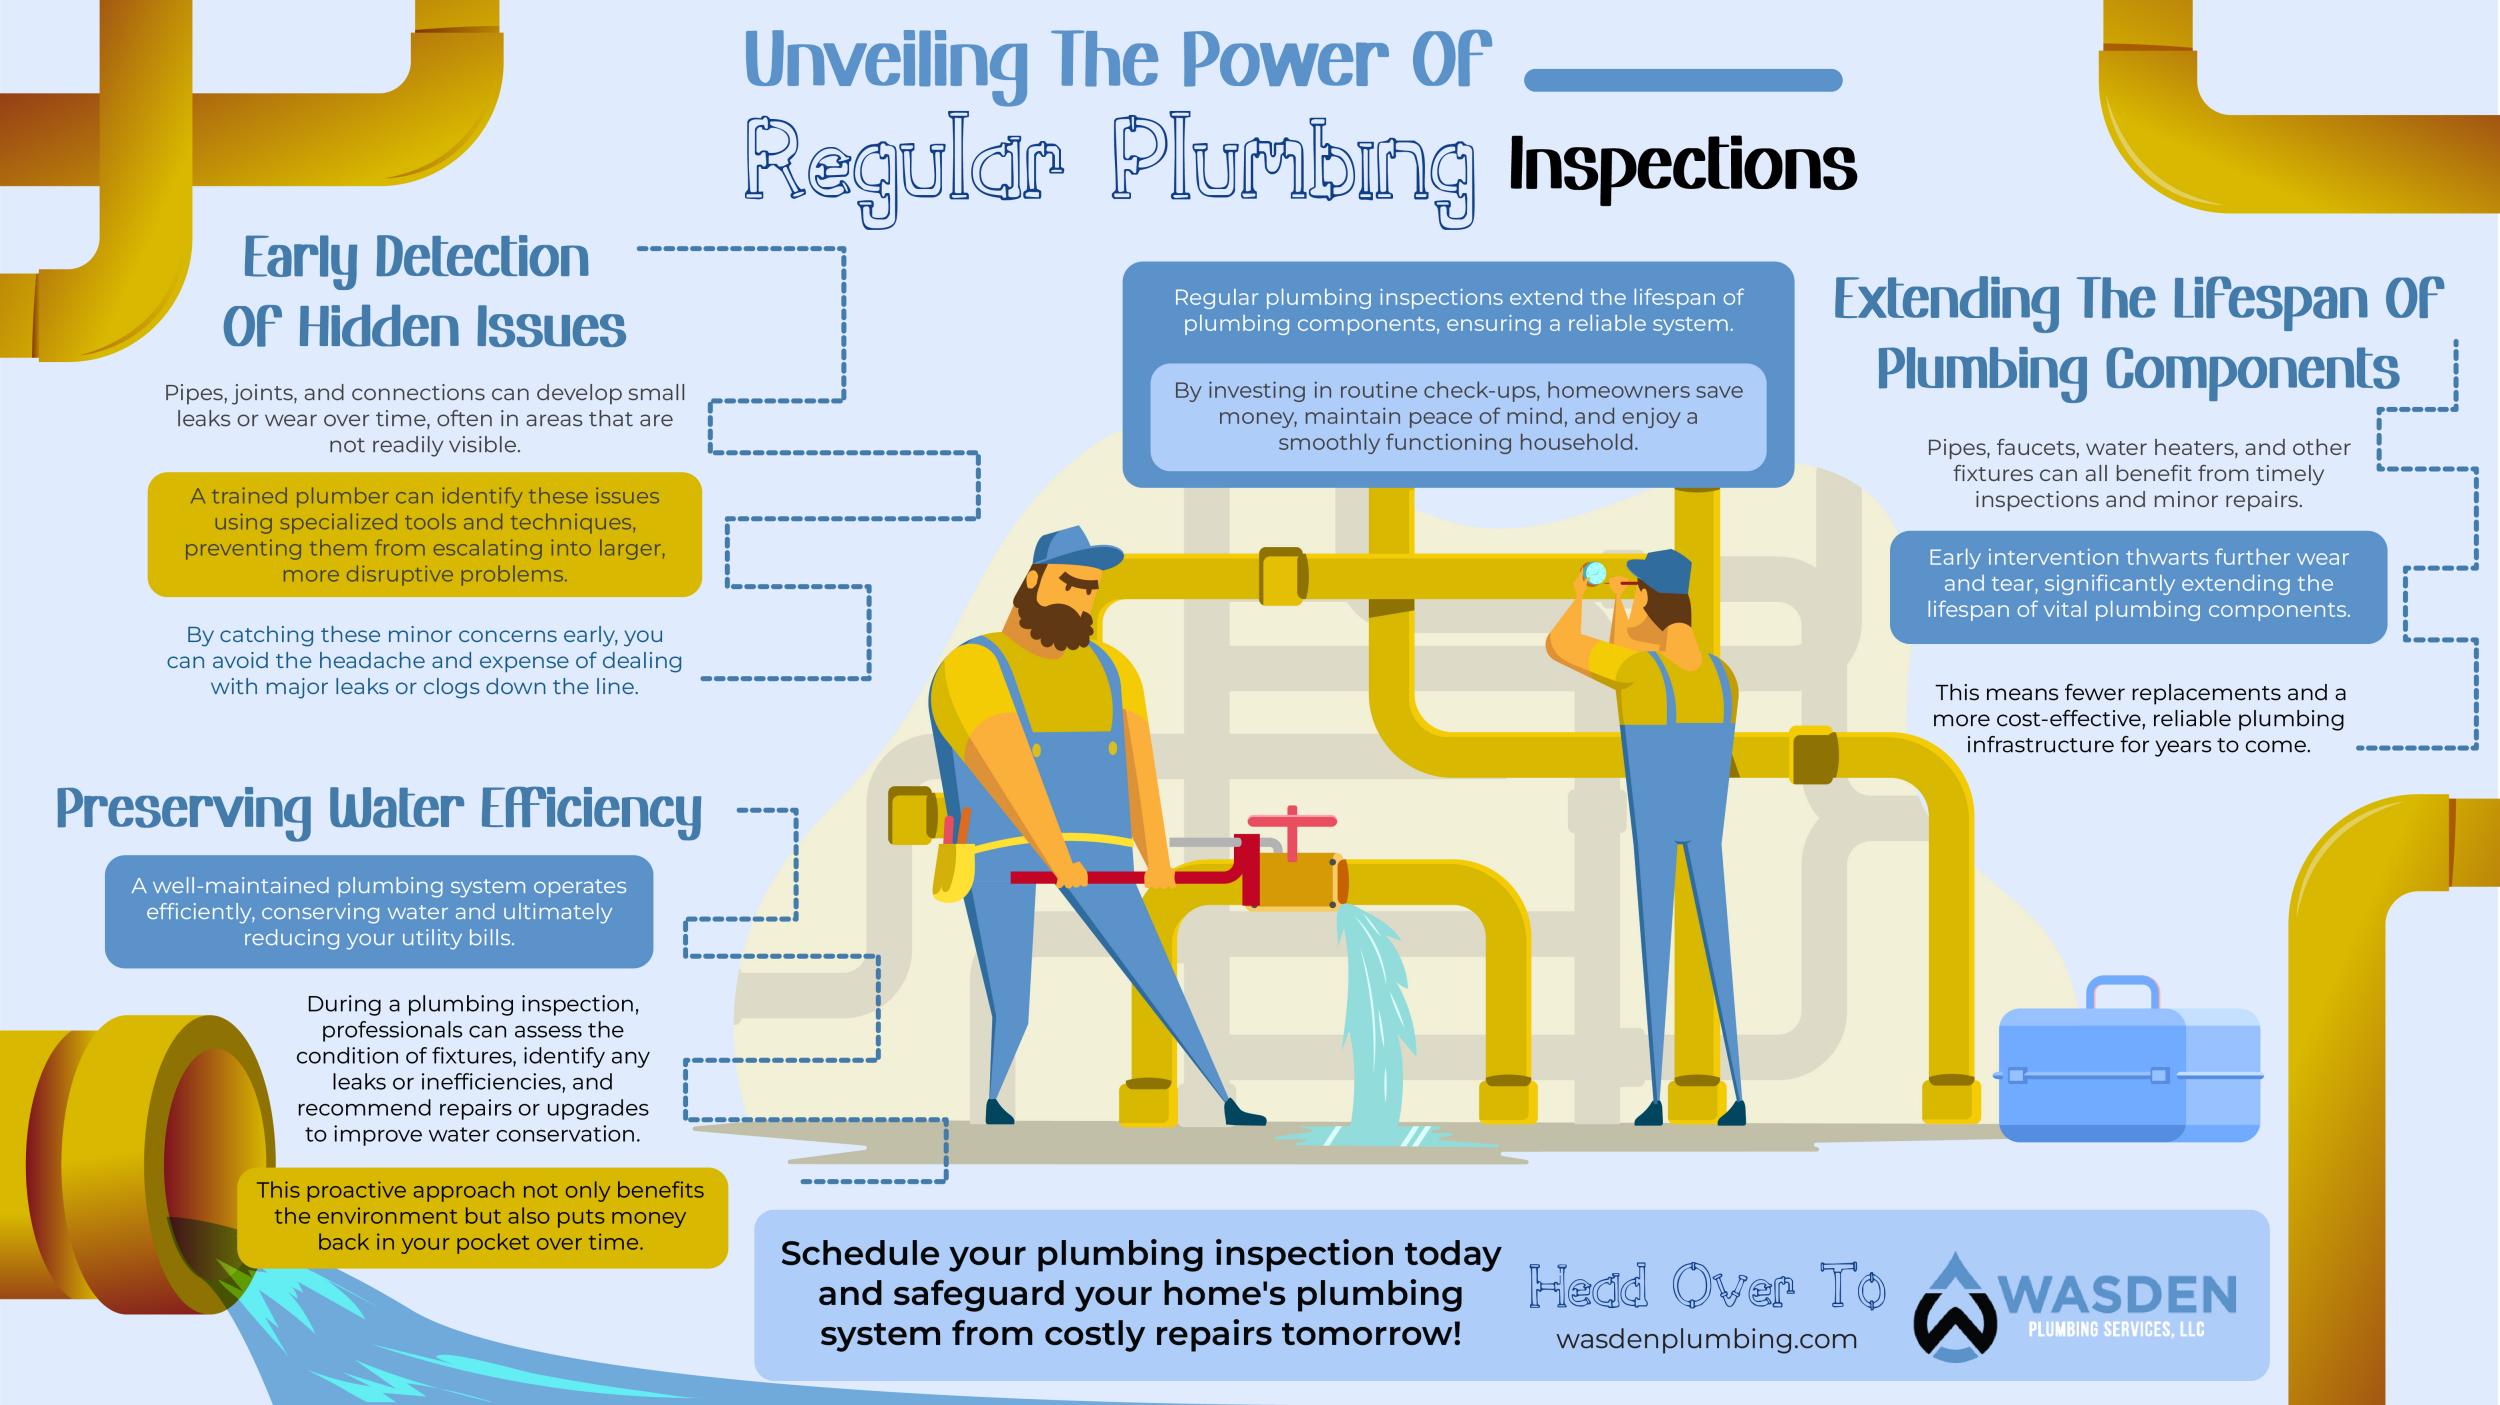 Unveiling The Power Of Regular Plumbing Inspections